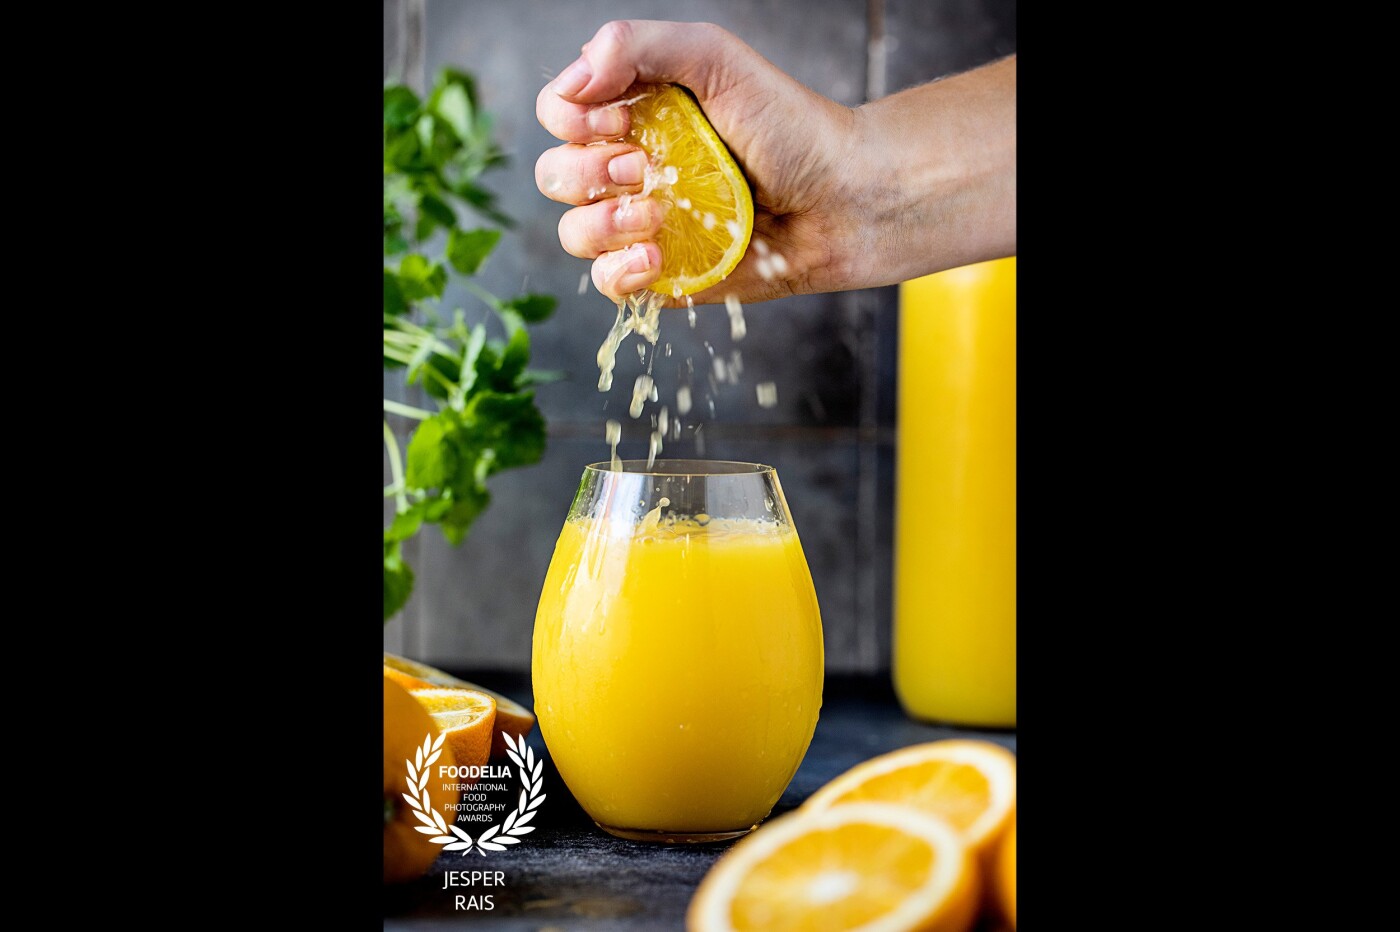 Freshly squeezed orange juice at restaurant @_greenilicious_ in Aarhus, Denmark. Everything is organically based and free of artificial sweeteners, colors, preservatives, and GMOs.